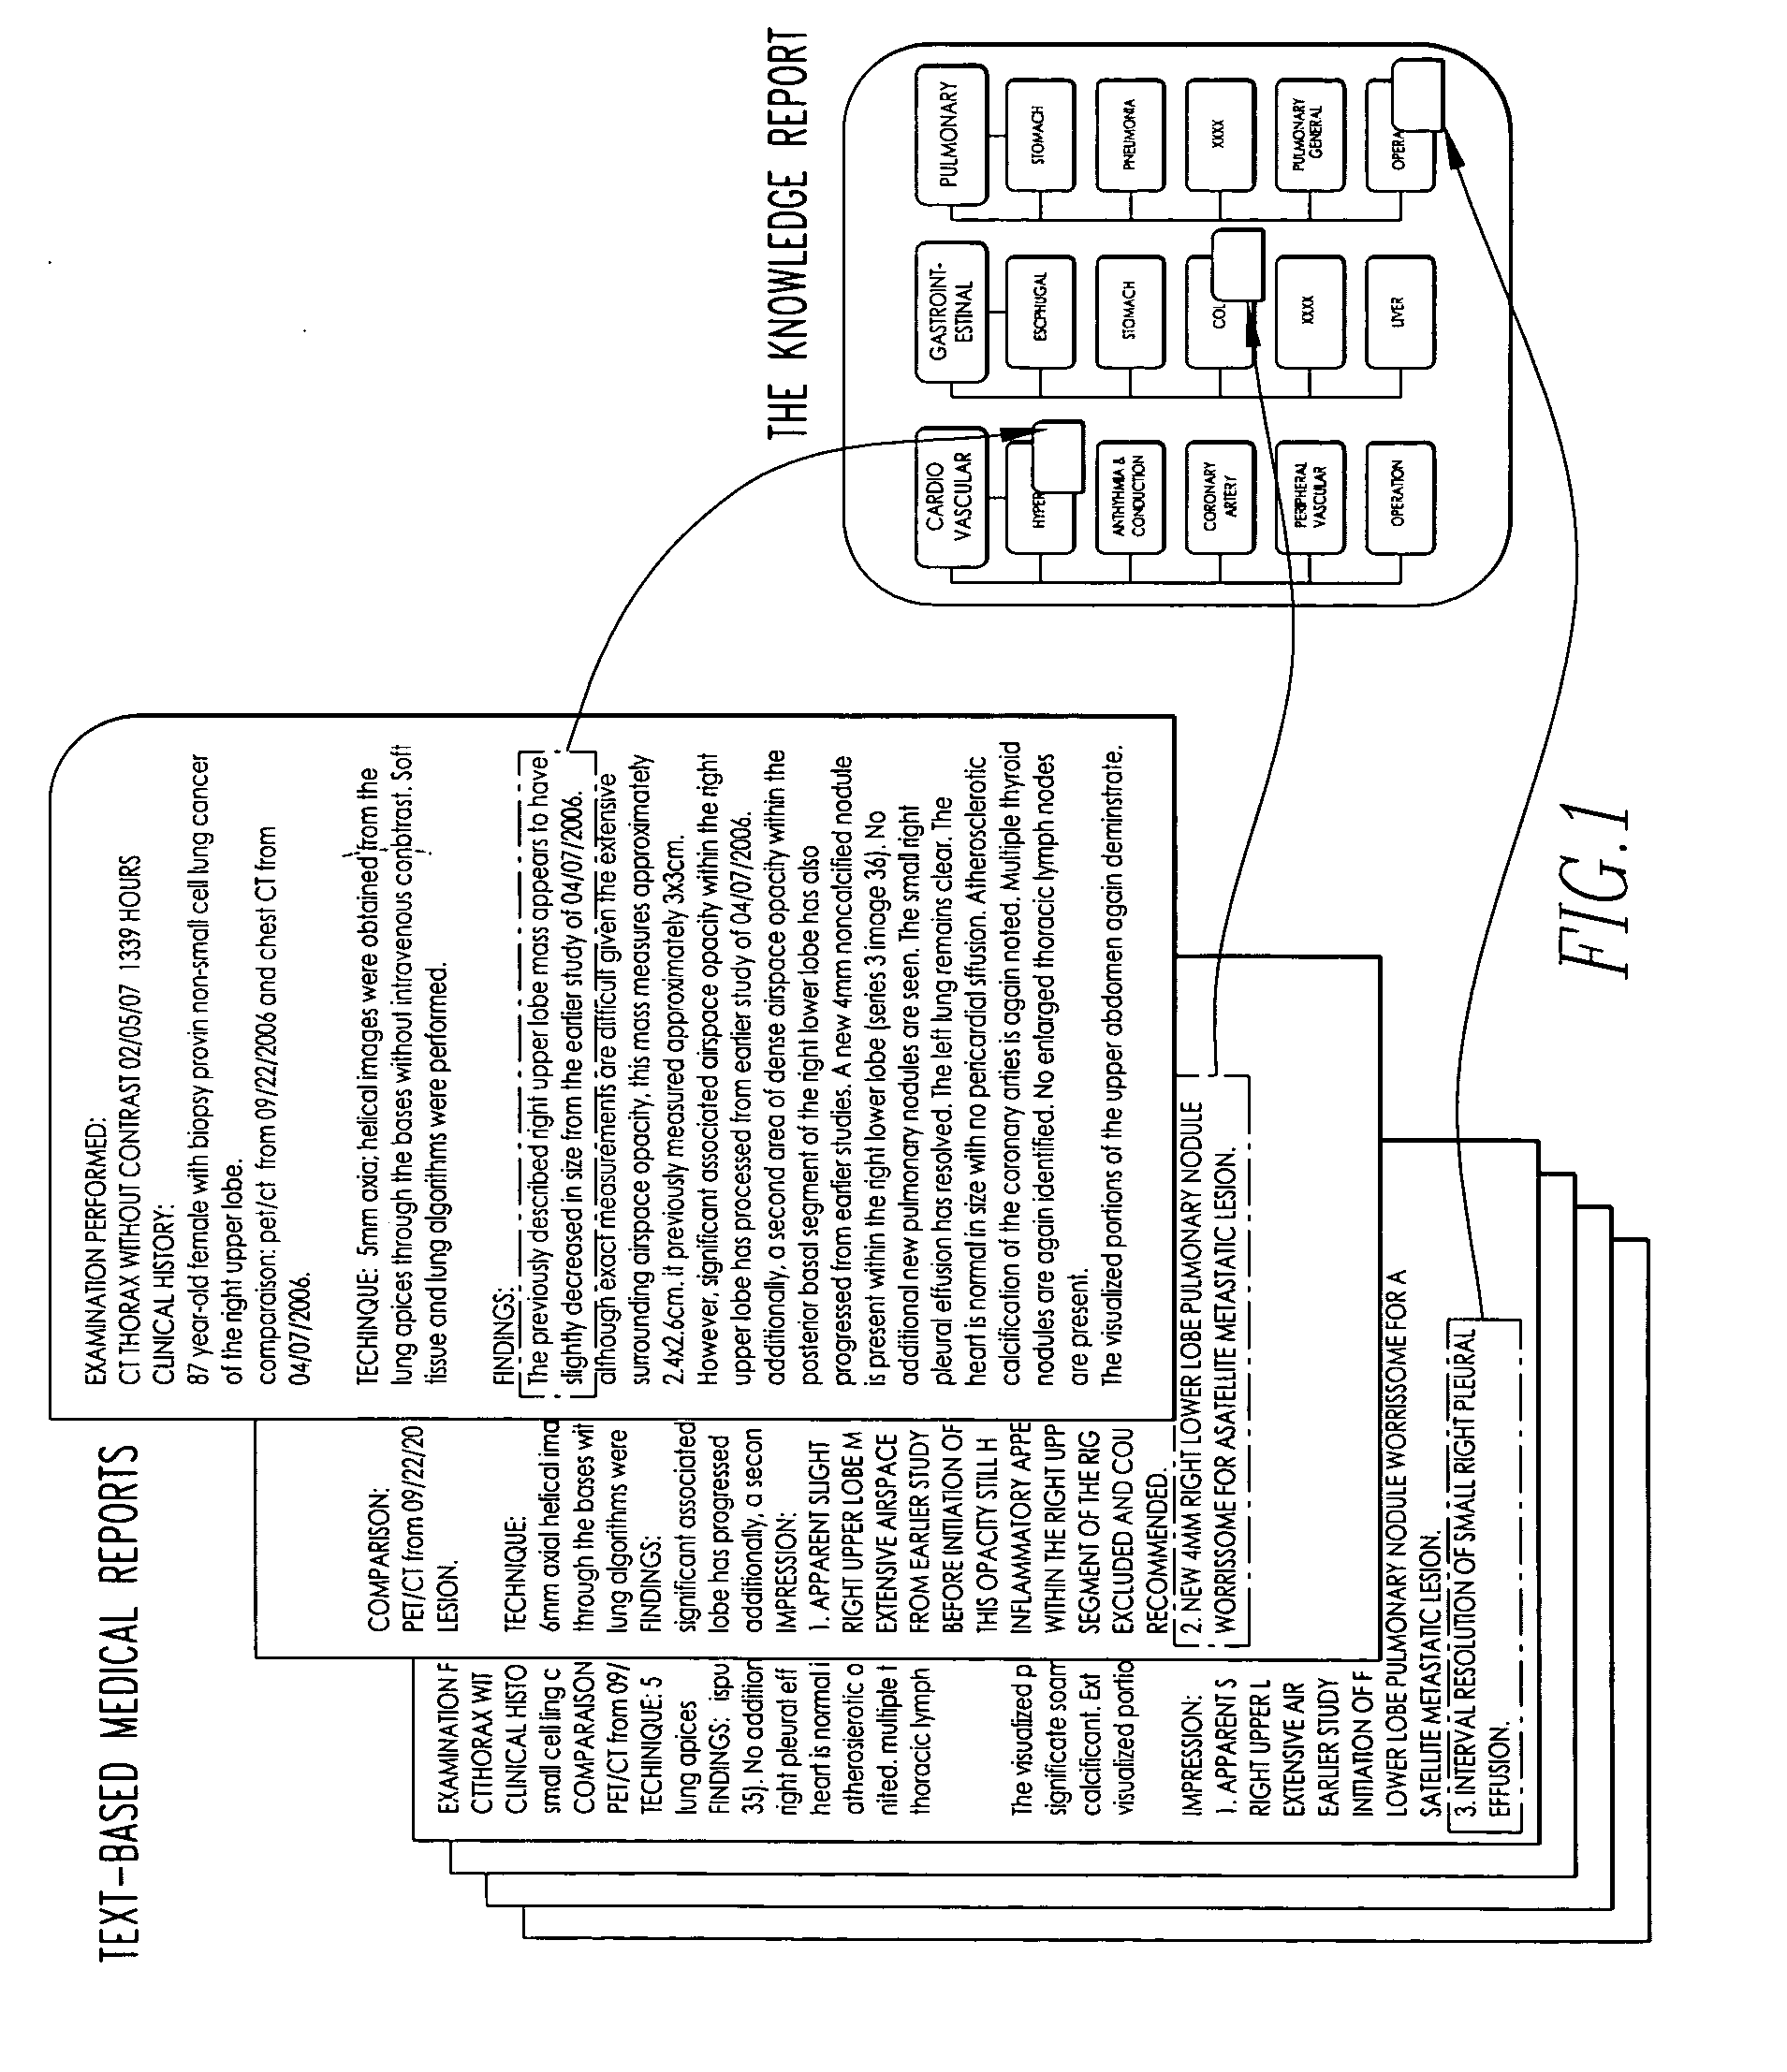 Method and system for presenting and processing multiple text-based medical reports